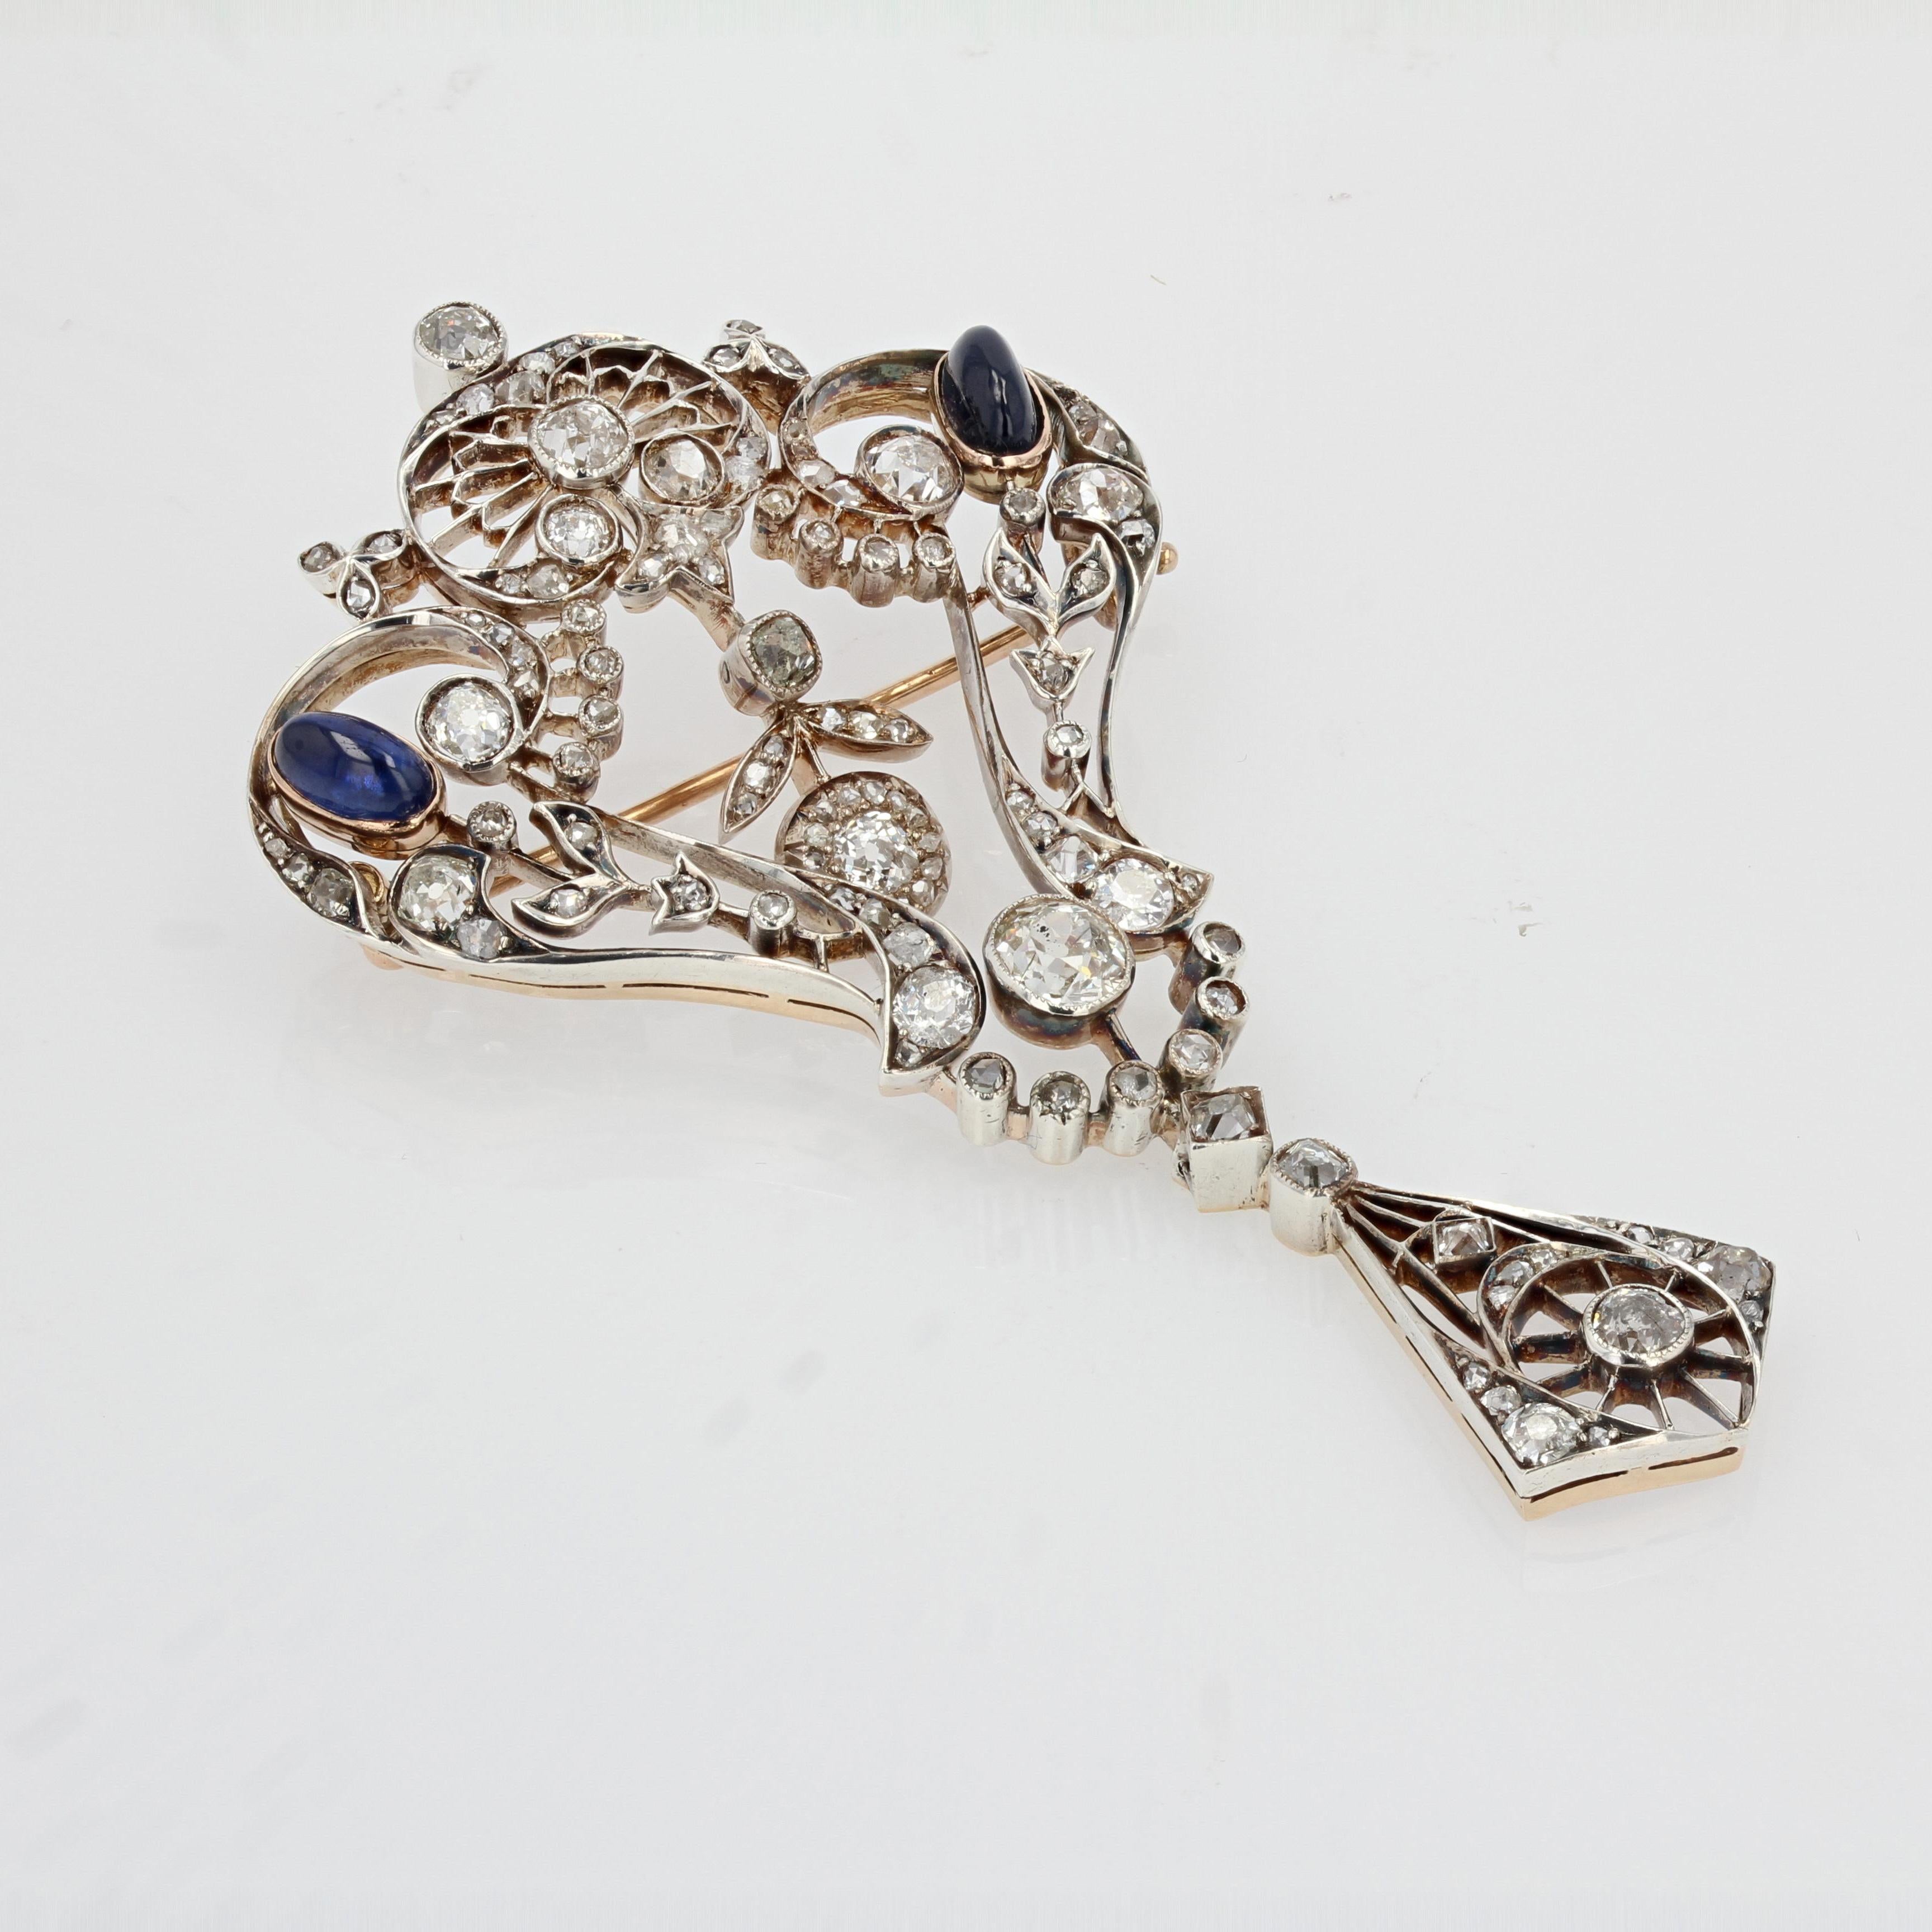 Sugarloaf Cabochon 1900s Diamonds Sapphire Cabochon Rose Gold Lace Brooch For Sale